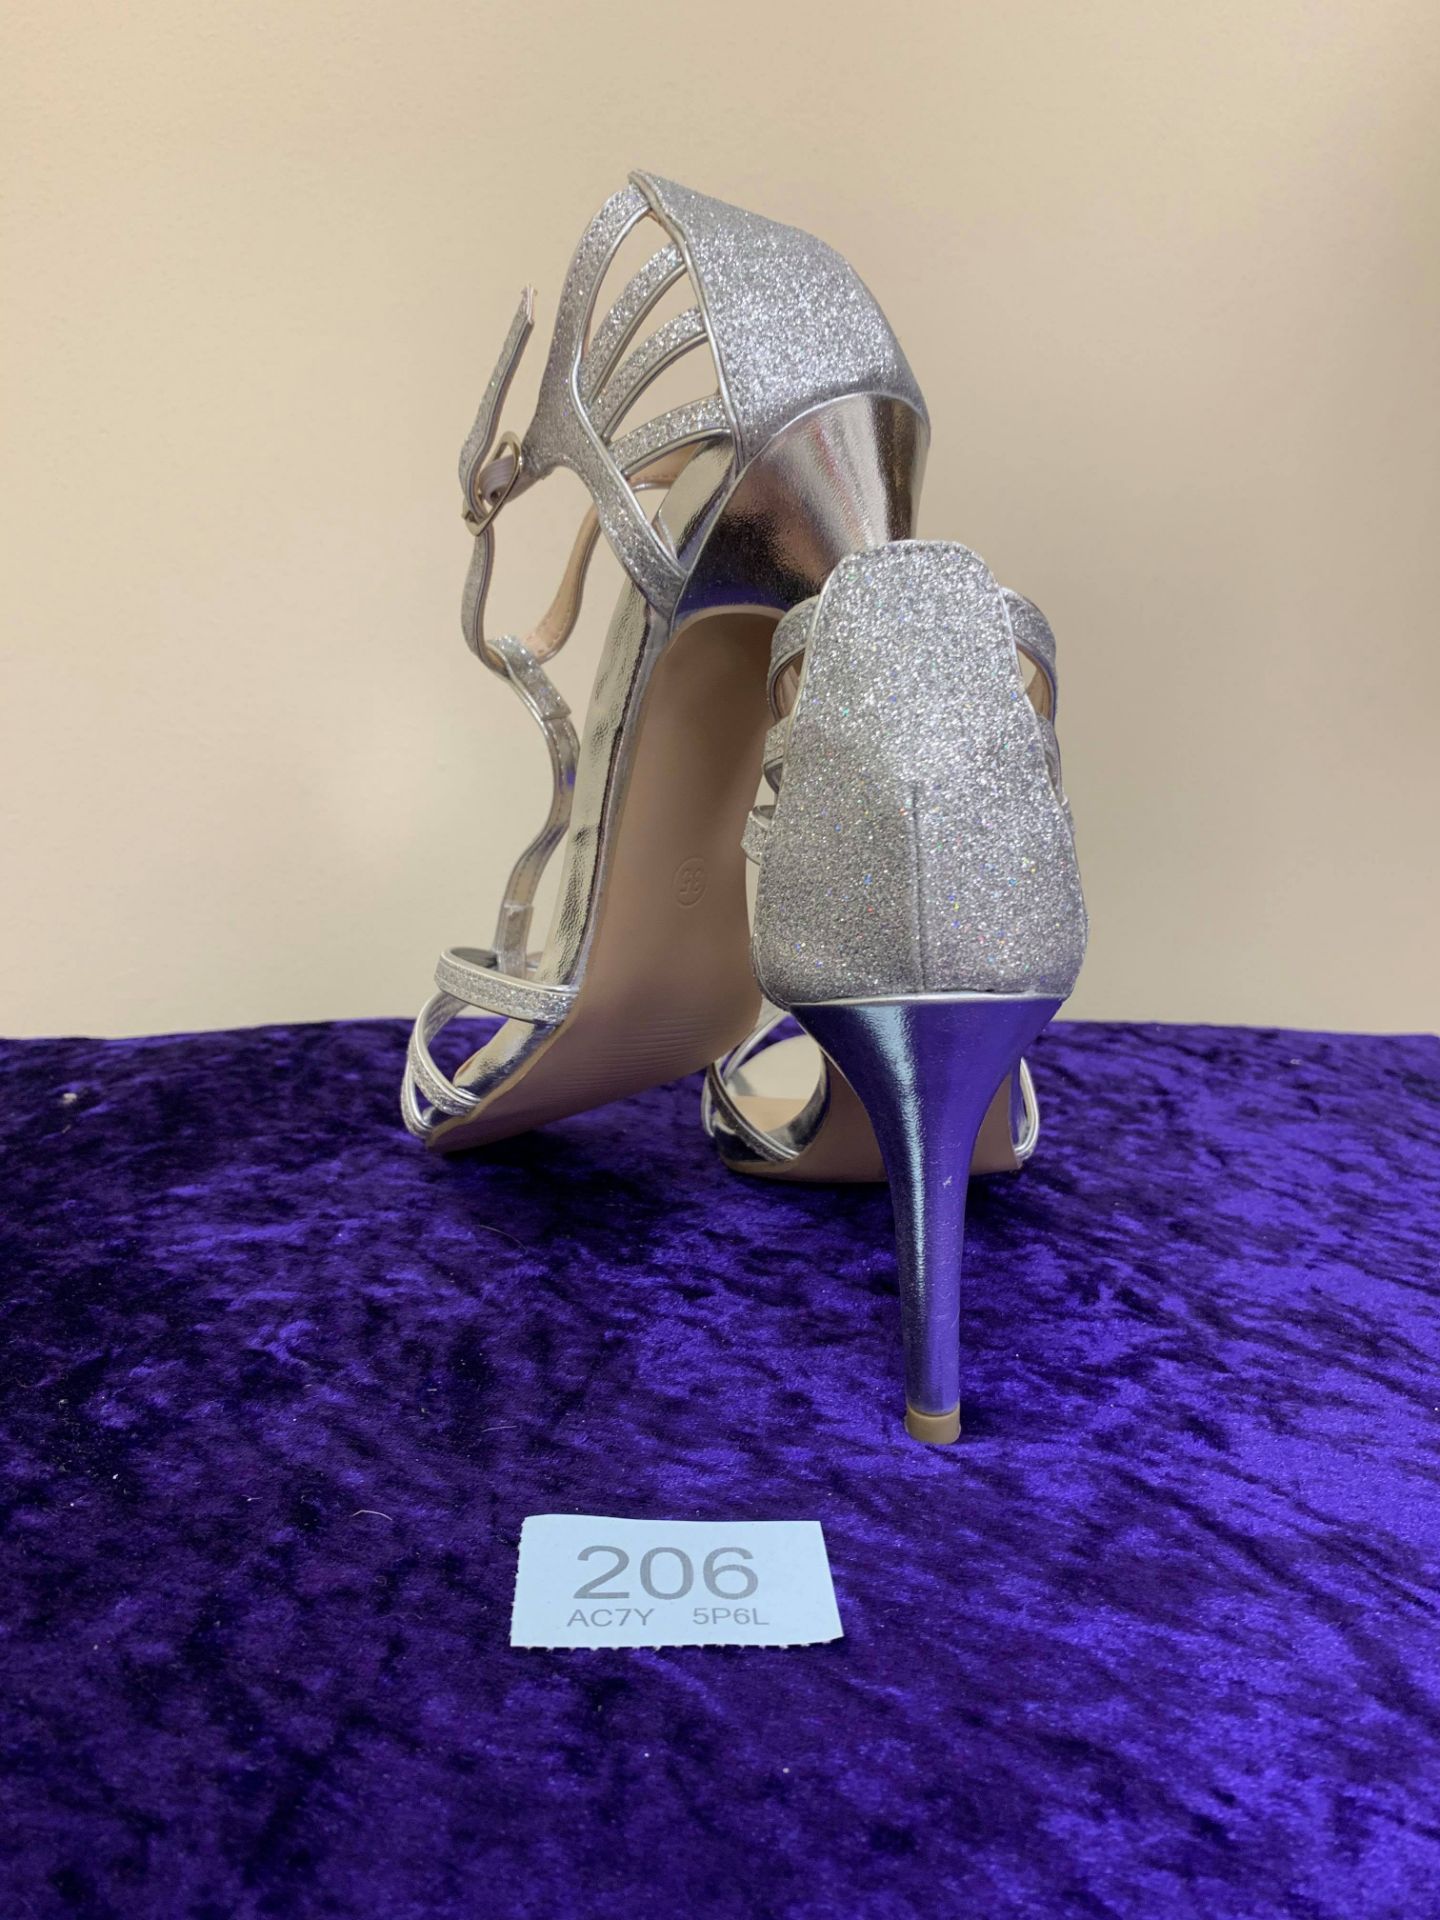 Designer Shoes Silver In Size 35. Code 206 - Image 8 of 8